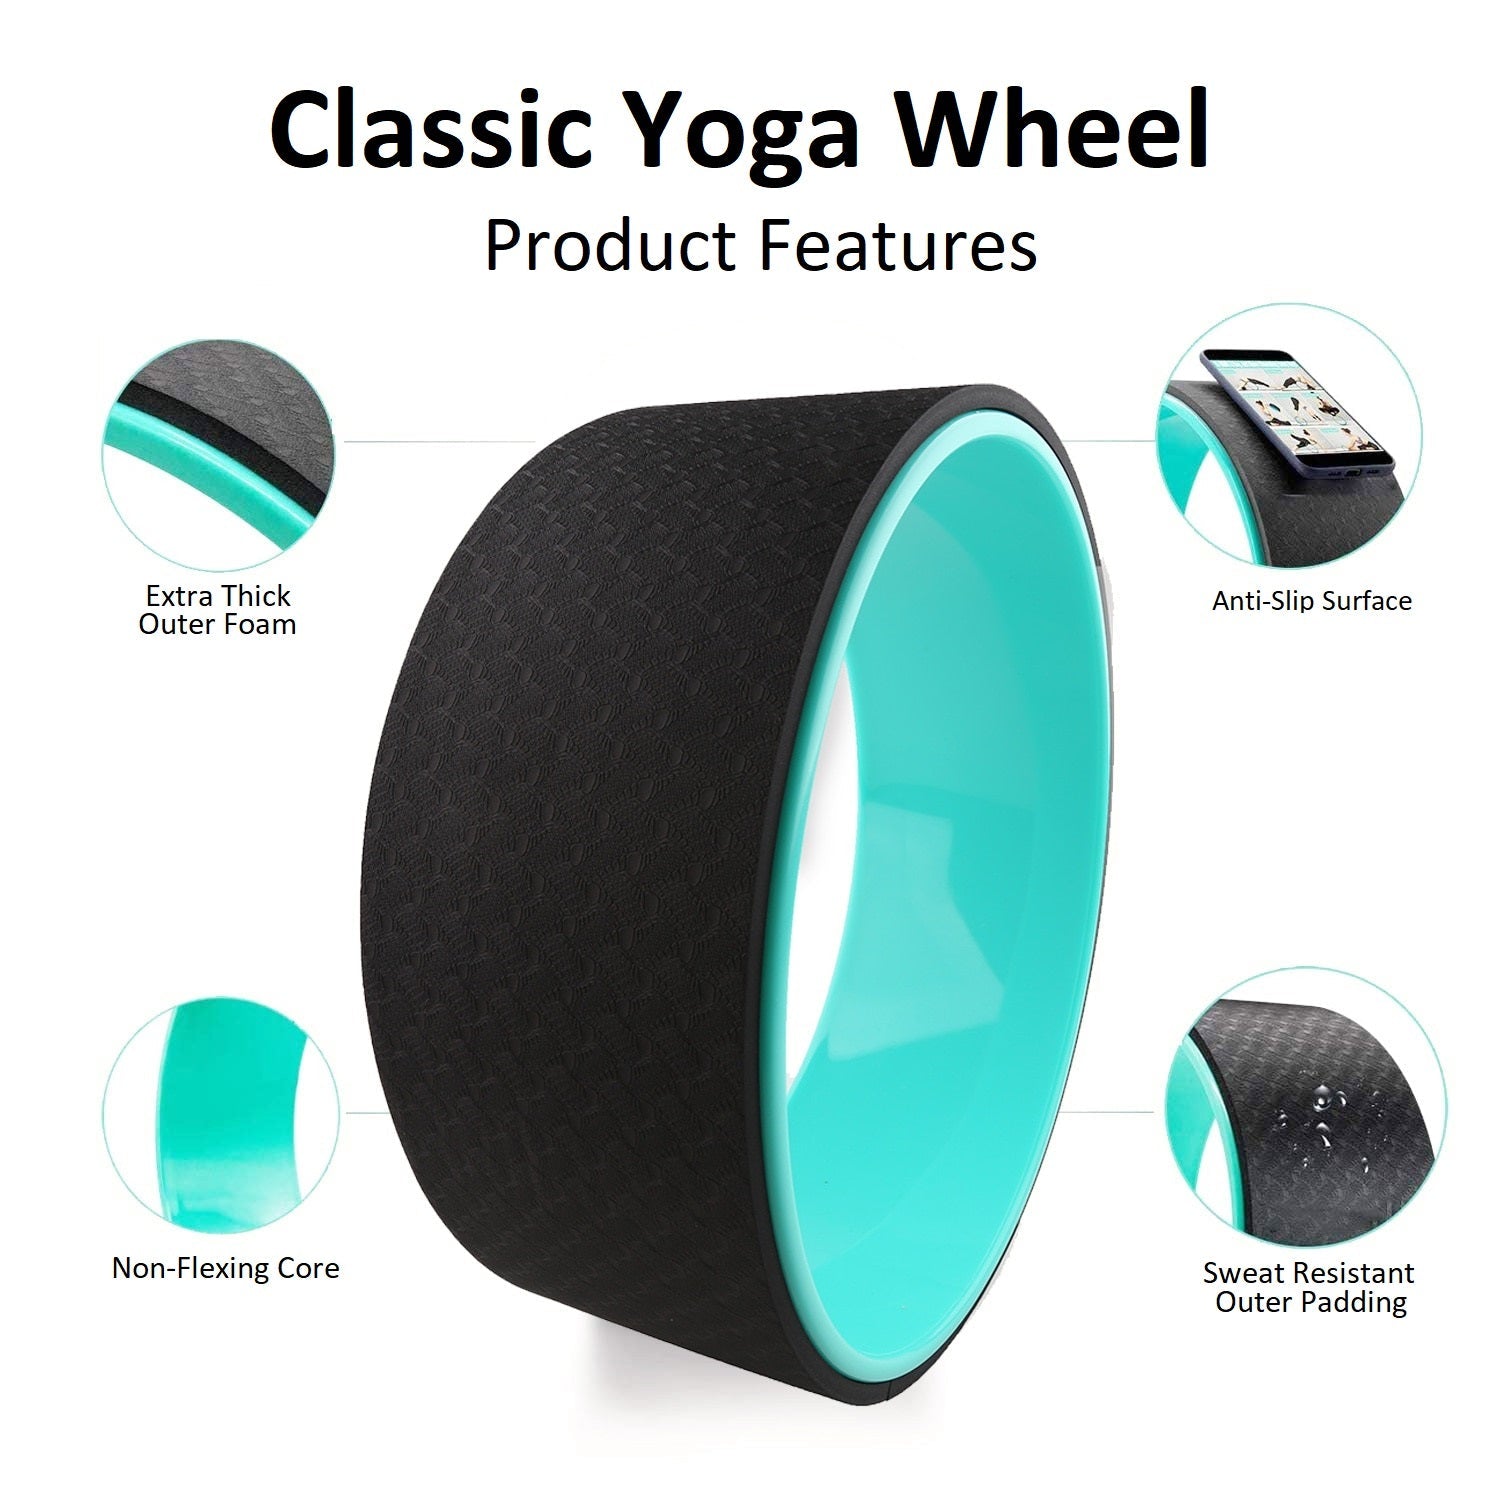 Blue Classic Yoga Wheel, durable PVC with anti-slip surface, built to support over 500lbs. Ideal for back pain relief, stretching muscles, and improving flexibility.